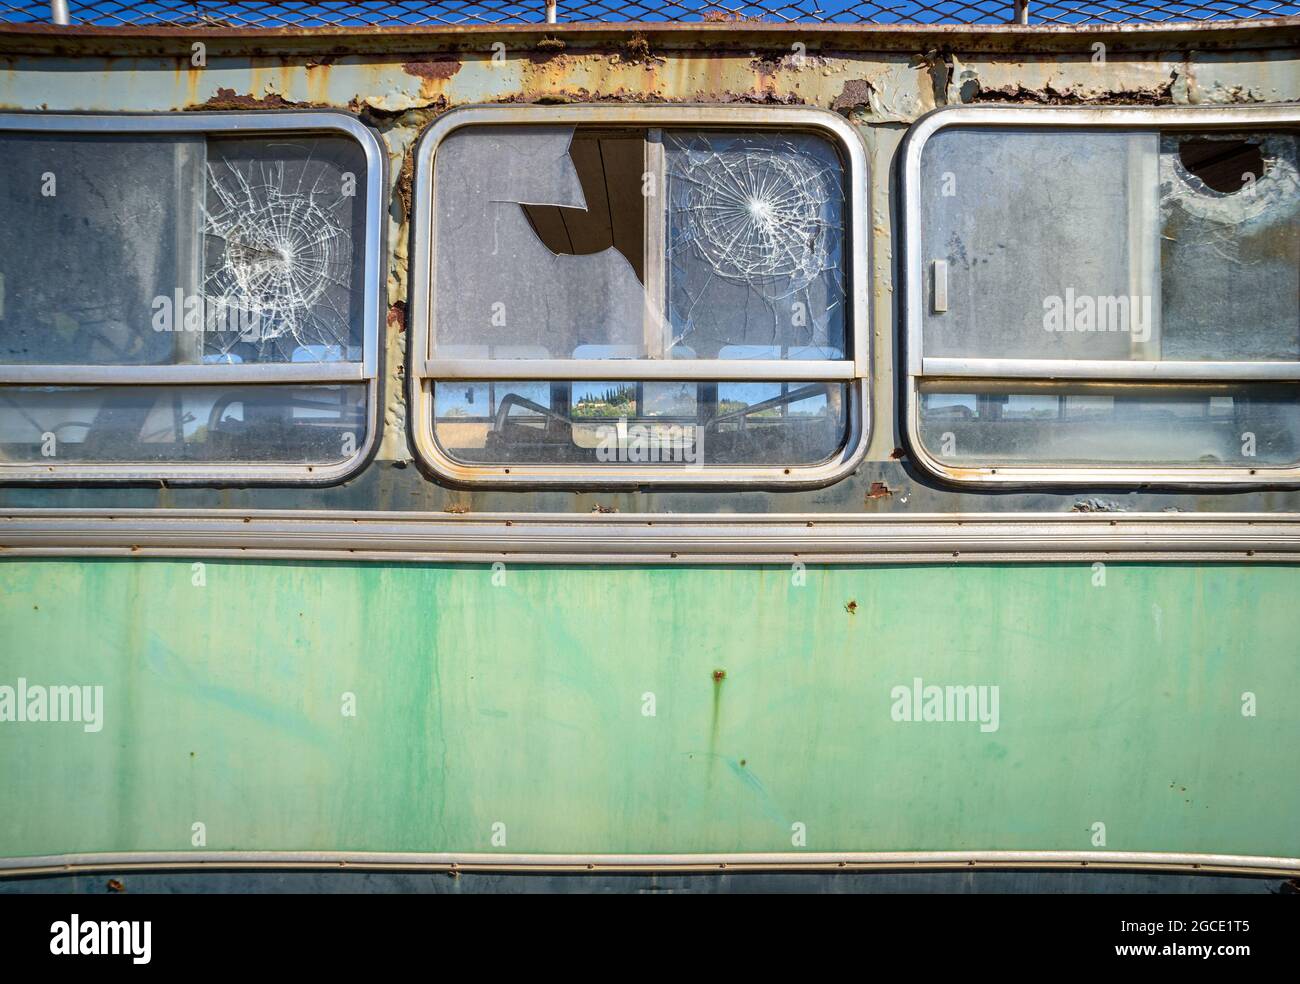 Abandoned old bus close up, side view. Vintage pattern with peeled paint and broken glass Stock Photo